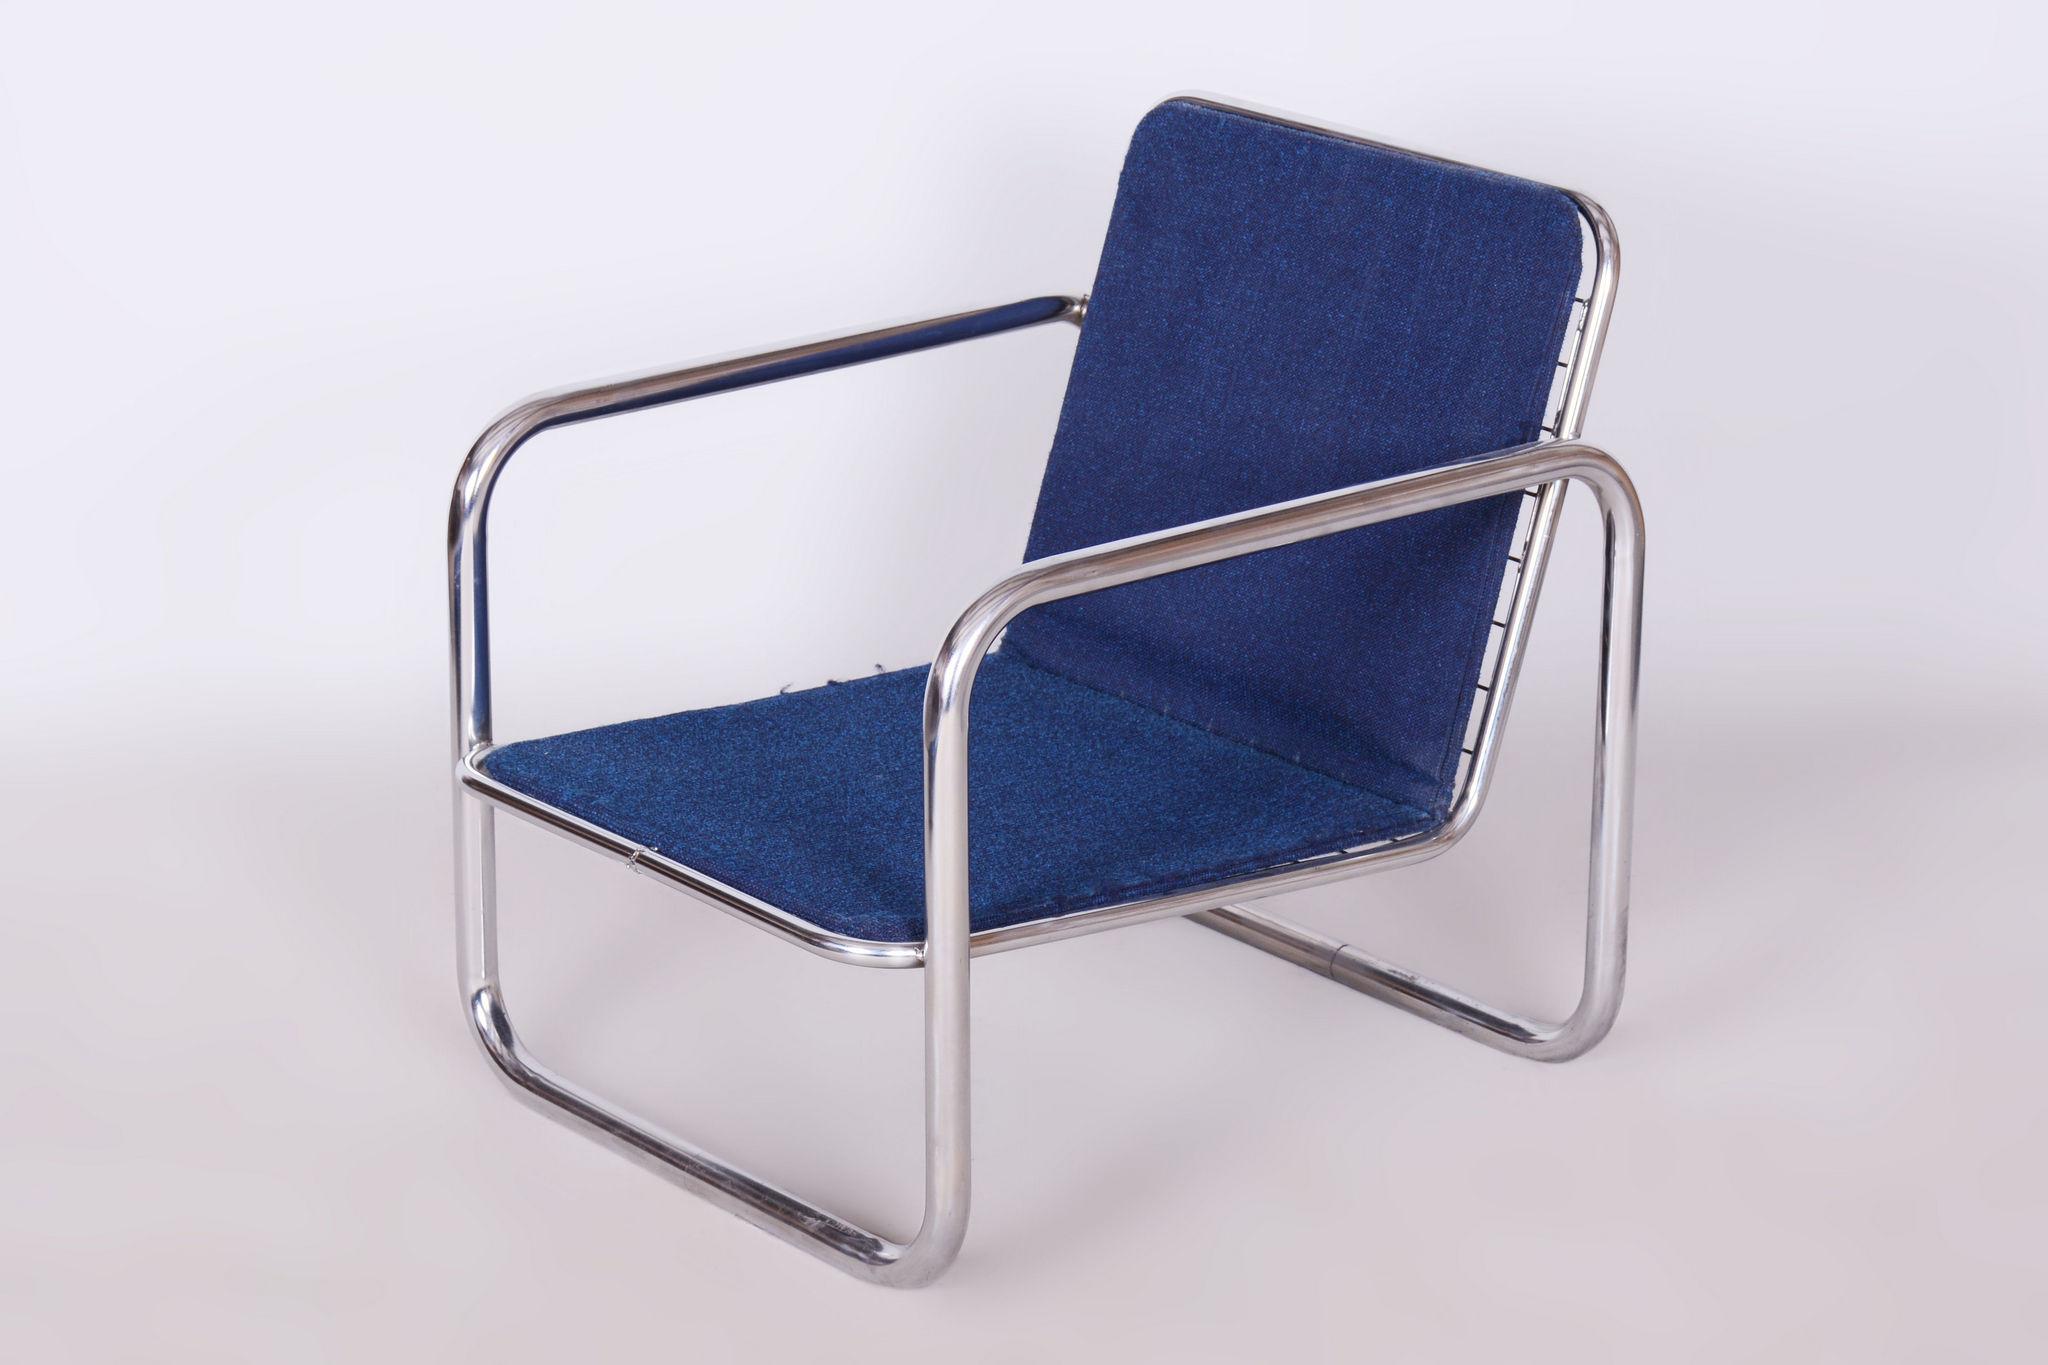 Original Bauhaus Armchair, Chrome-Plated Steel, Cleaned Upholstery, Czech, 1950s For Sale 7